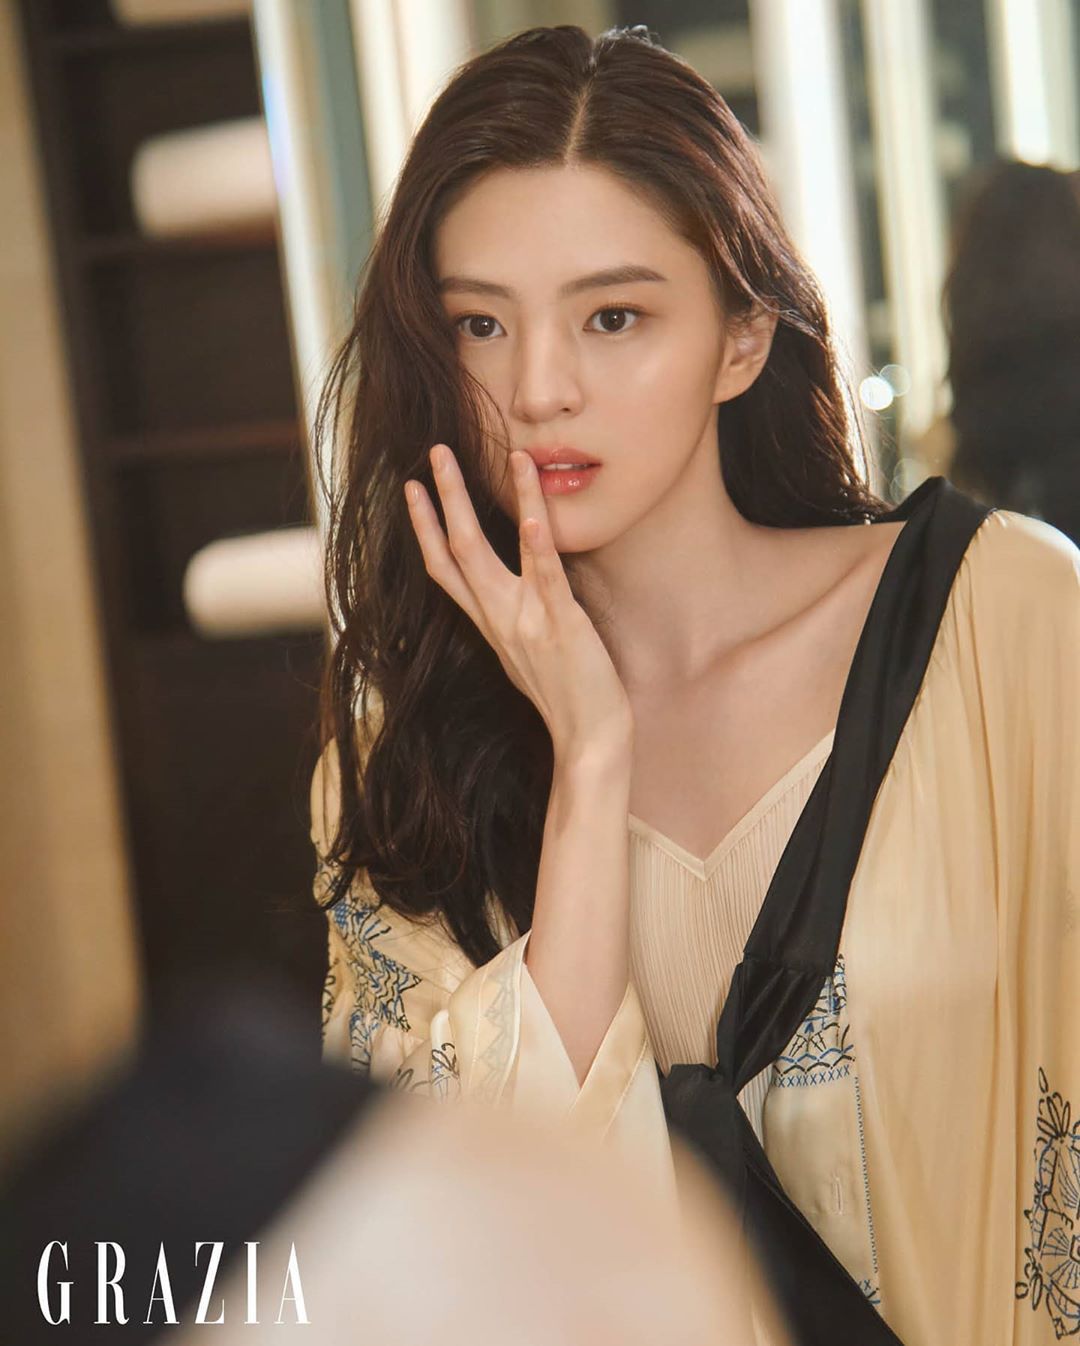 Han So Hee Is A Fascinating Beauty In The Photoshoot Vrogue Co